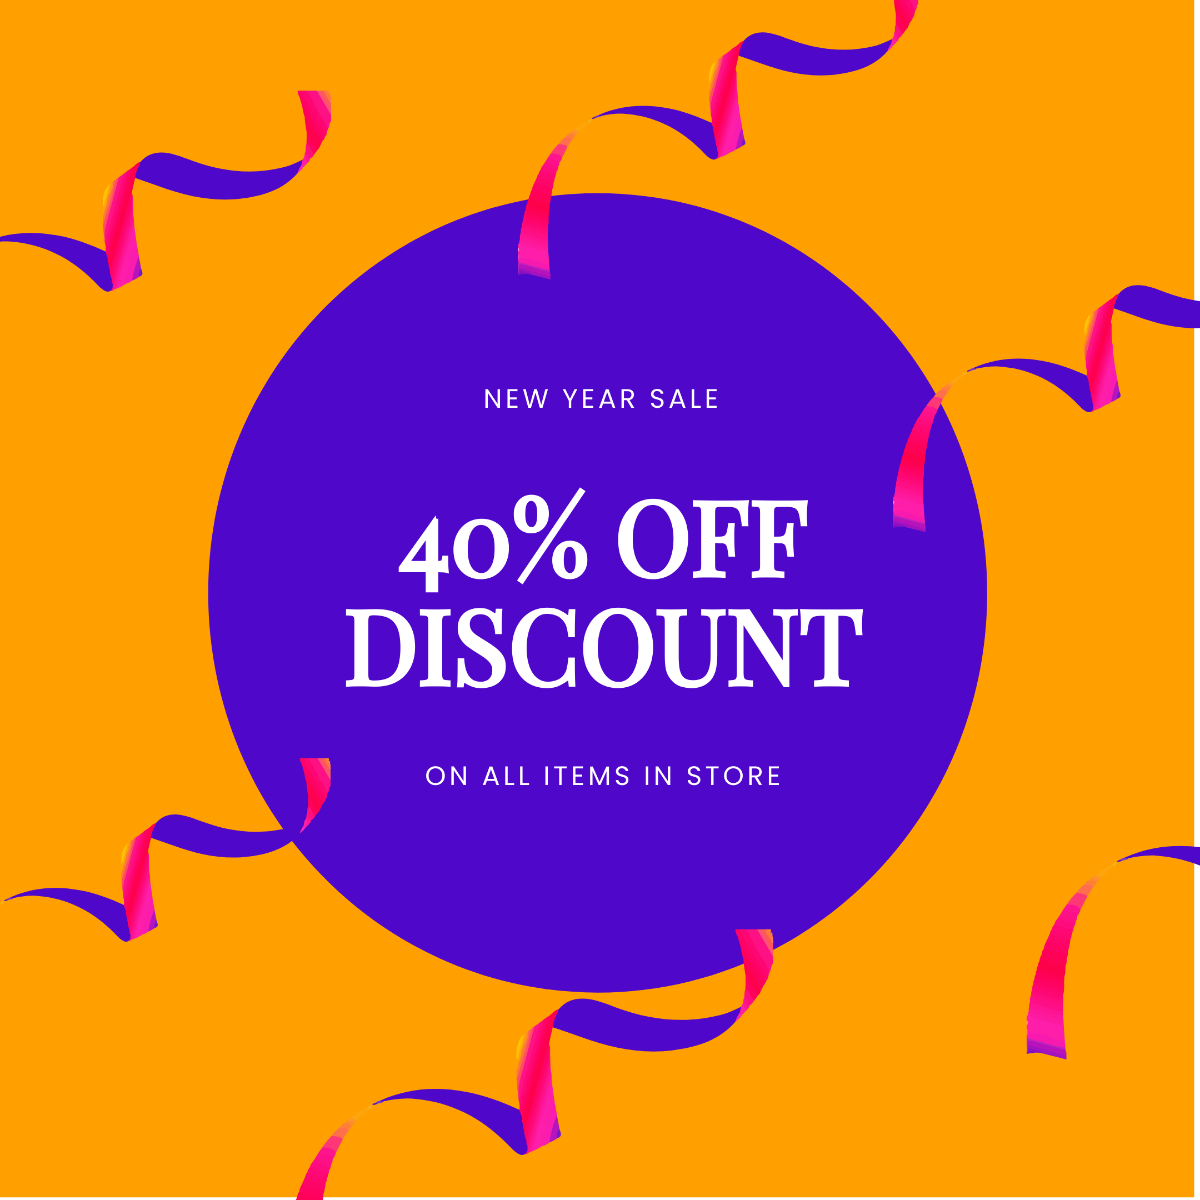 Holiday Discount Sale Instagram Post Template